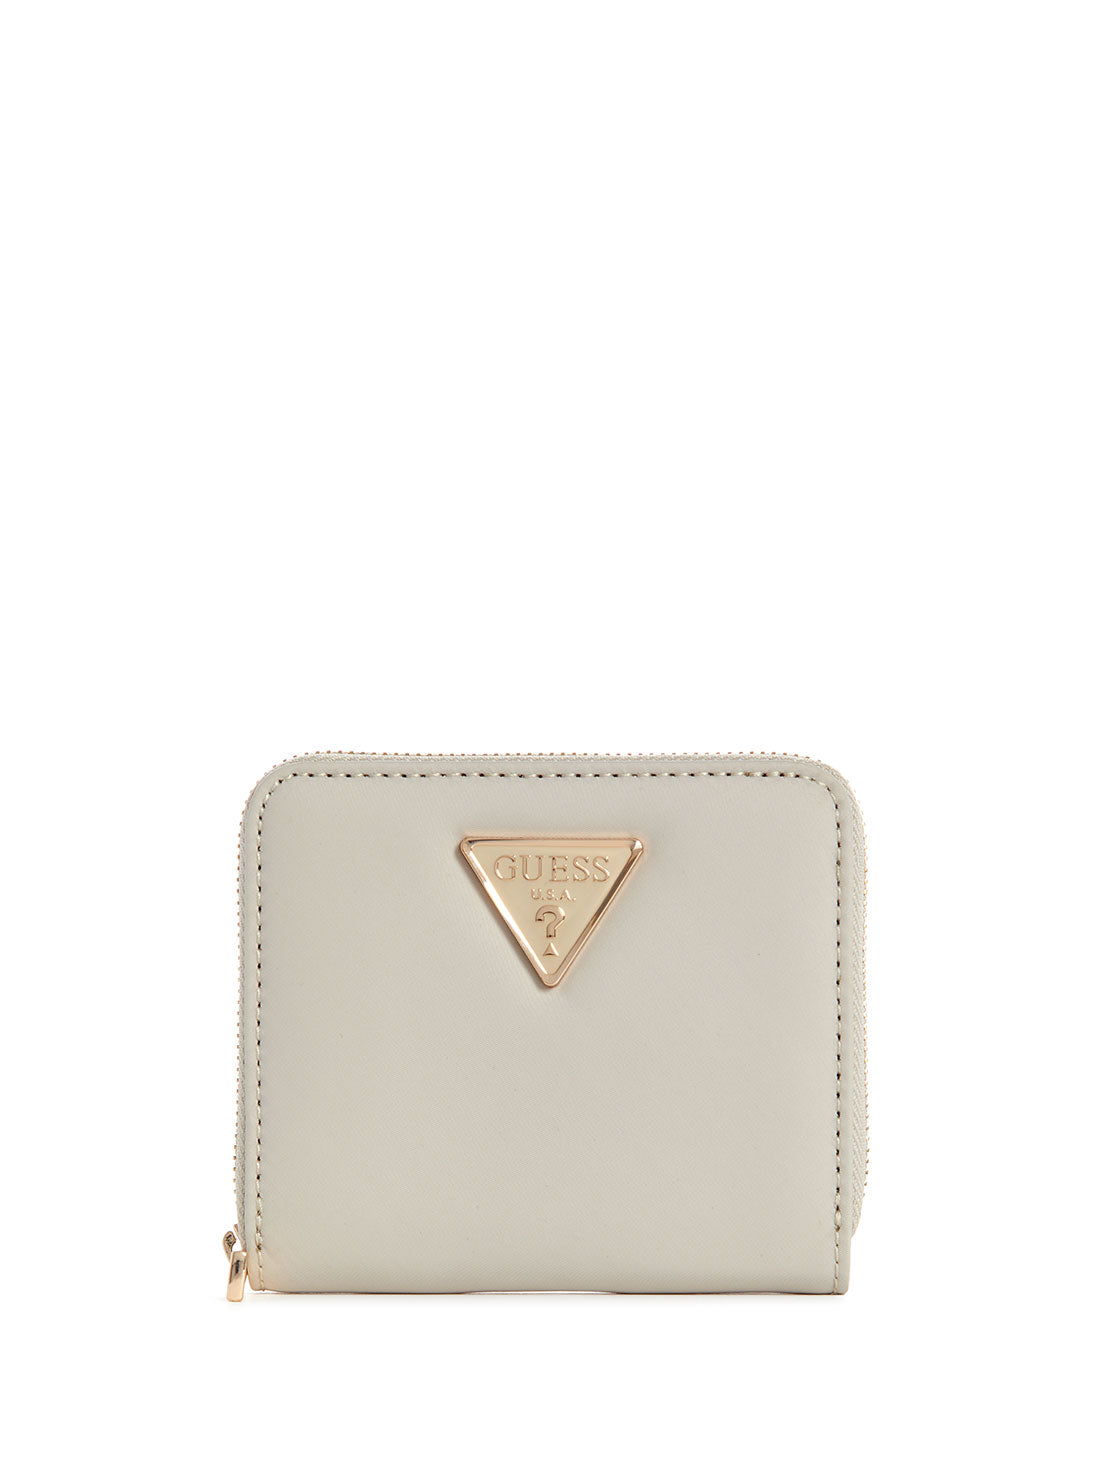 GUESS Eco Cream Beige Gemma Small Wallet front view